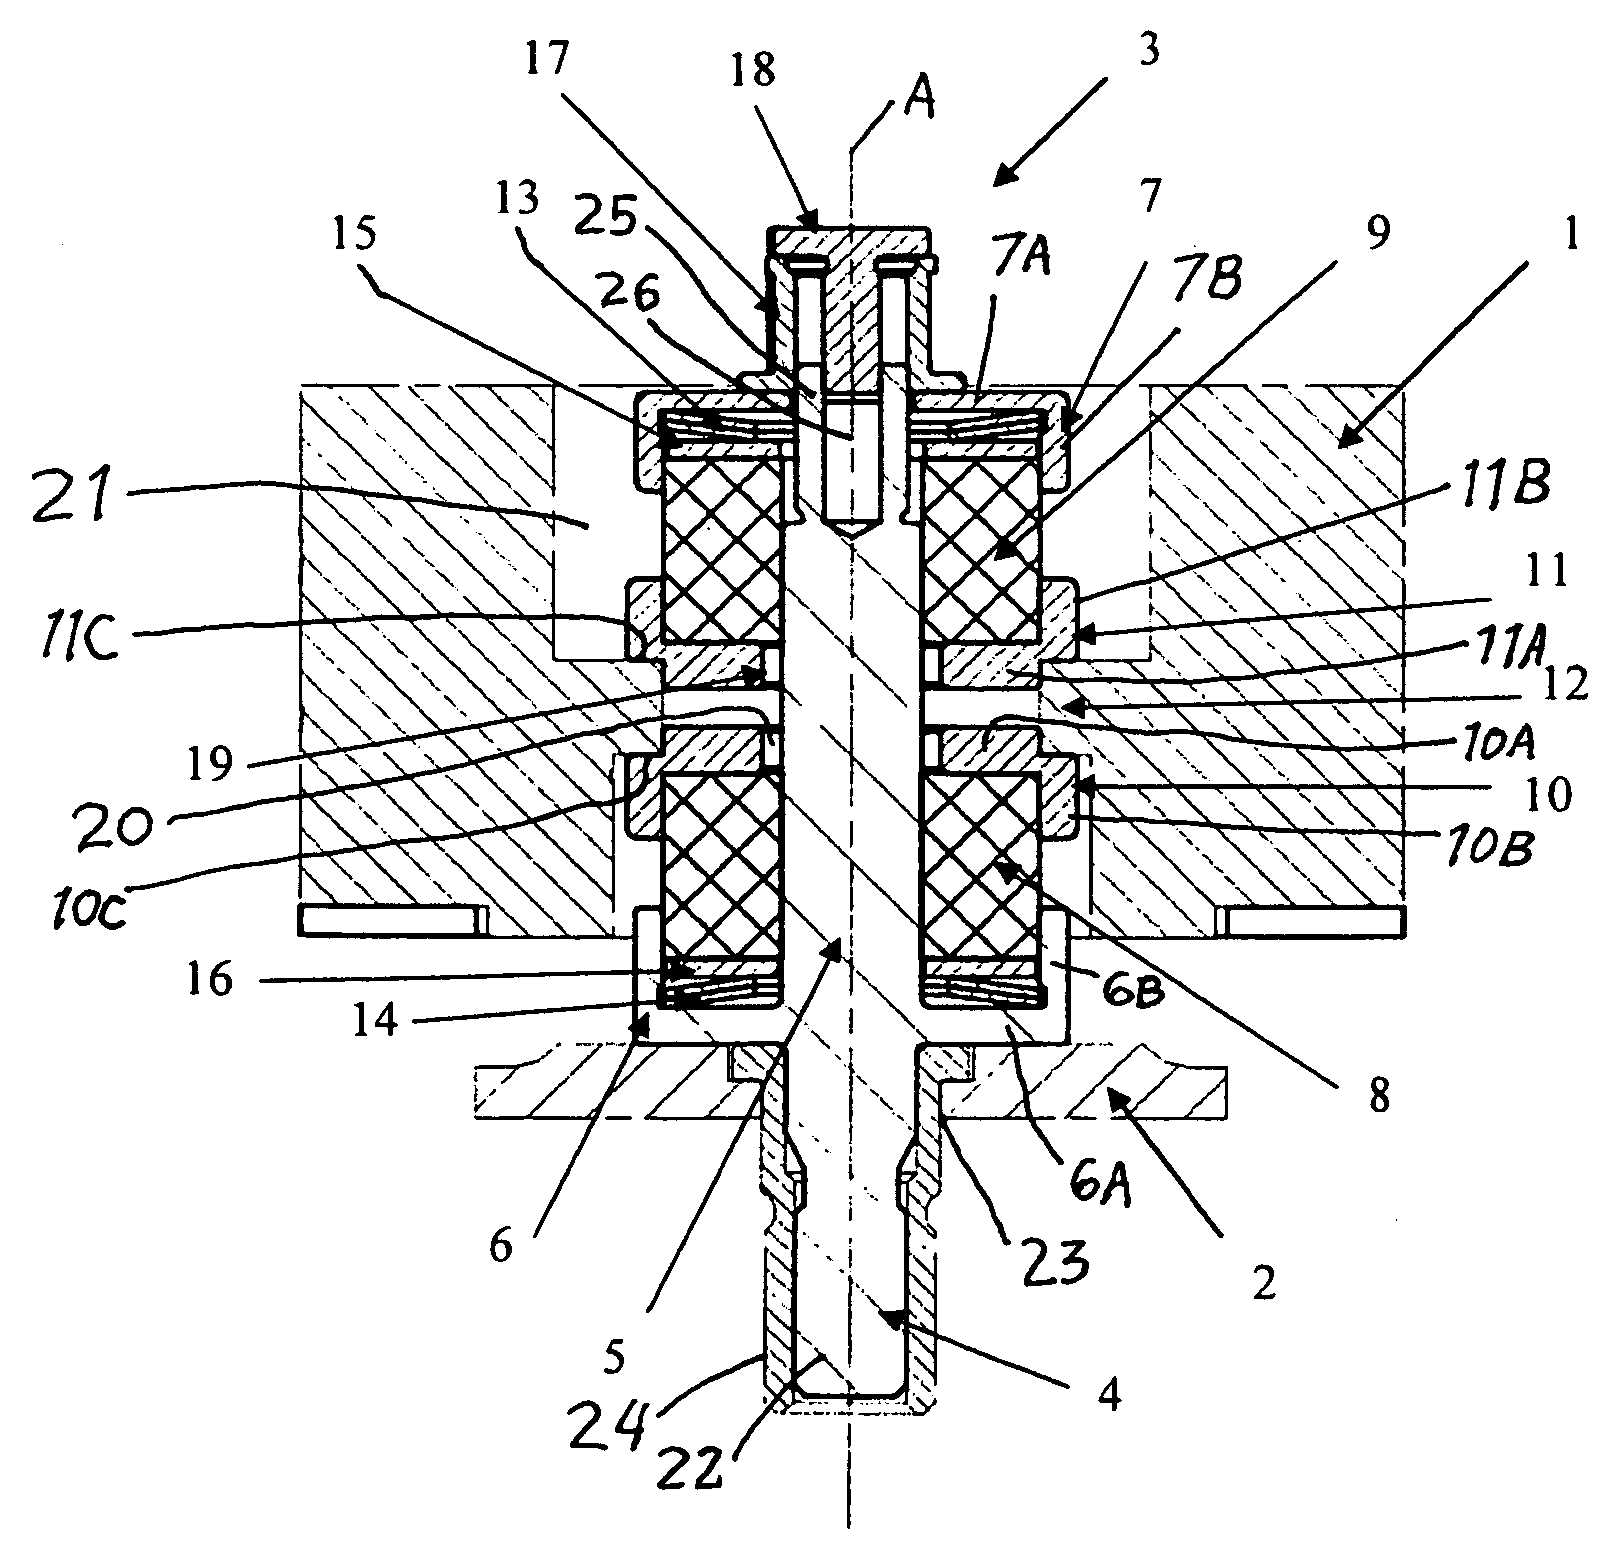 Multi-axis spring damping system for a payload in a spacecraft